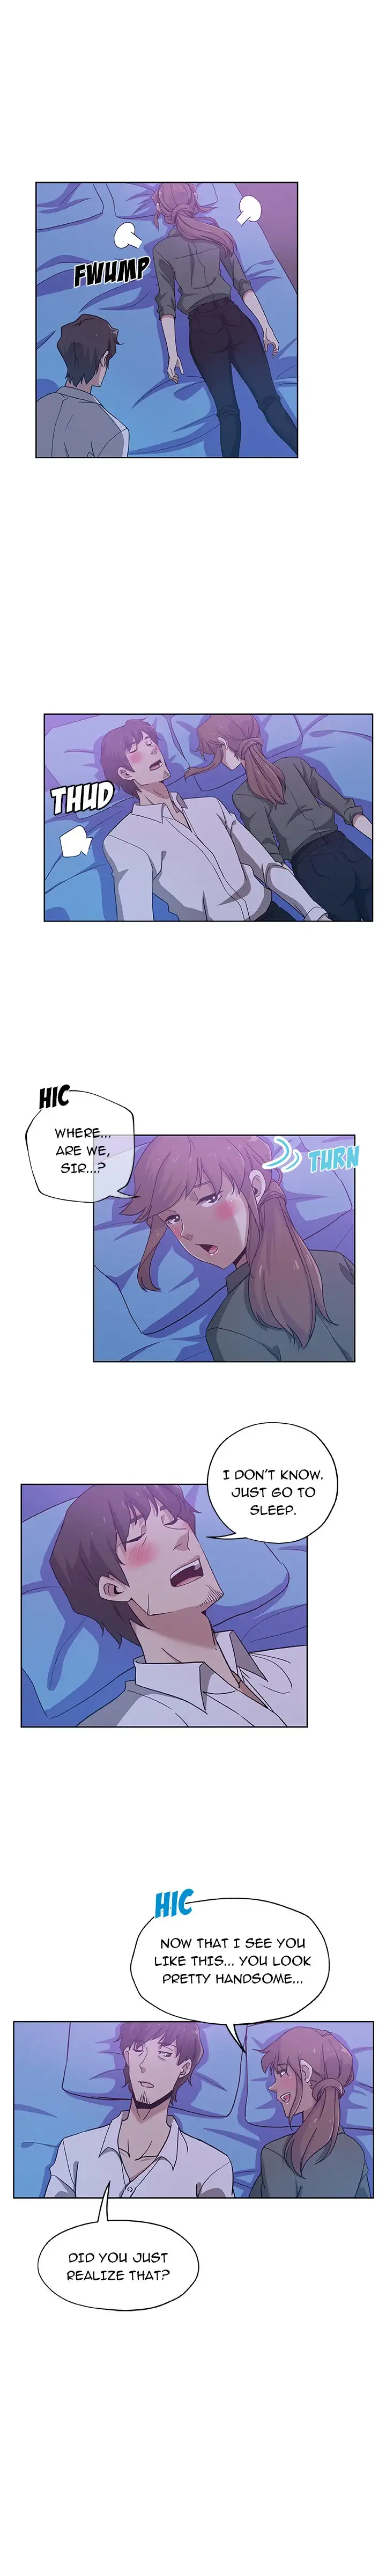 Missing Nine - Chapter 7 Page 6